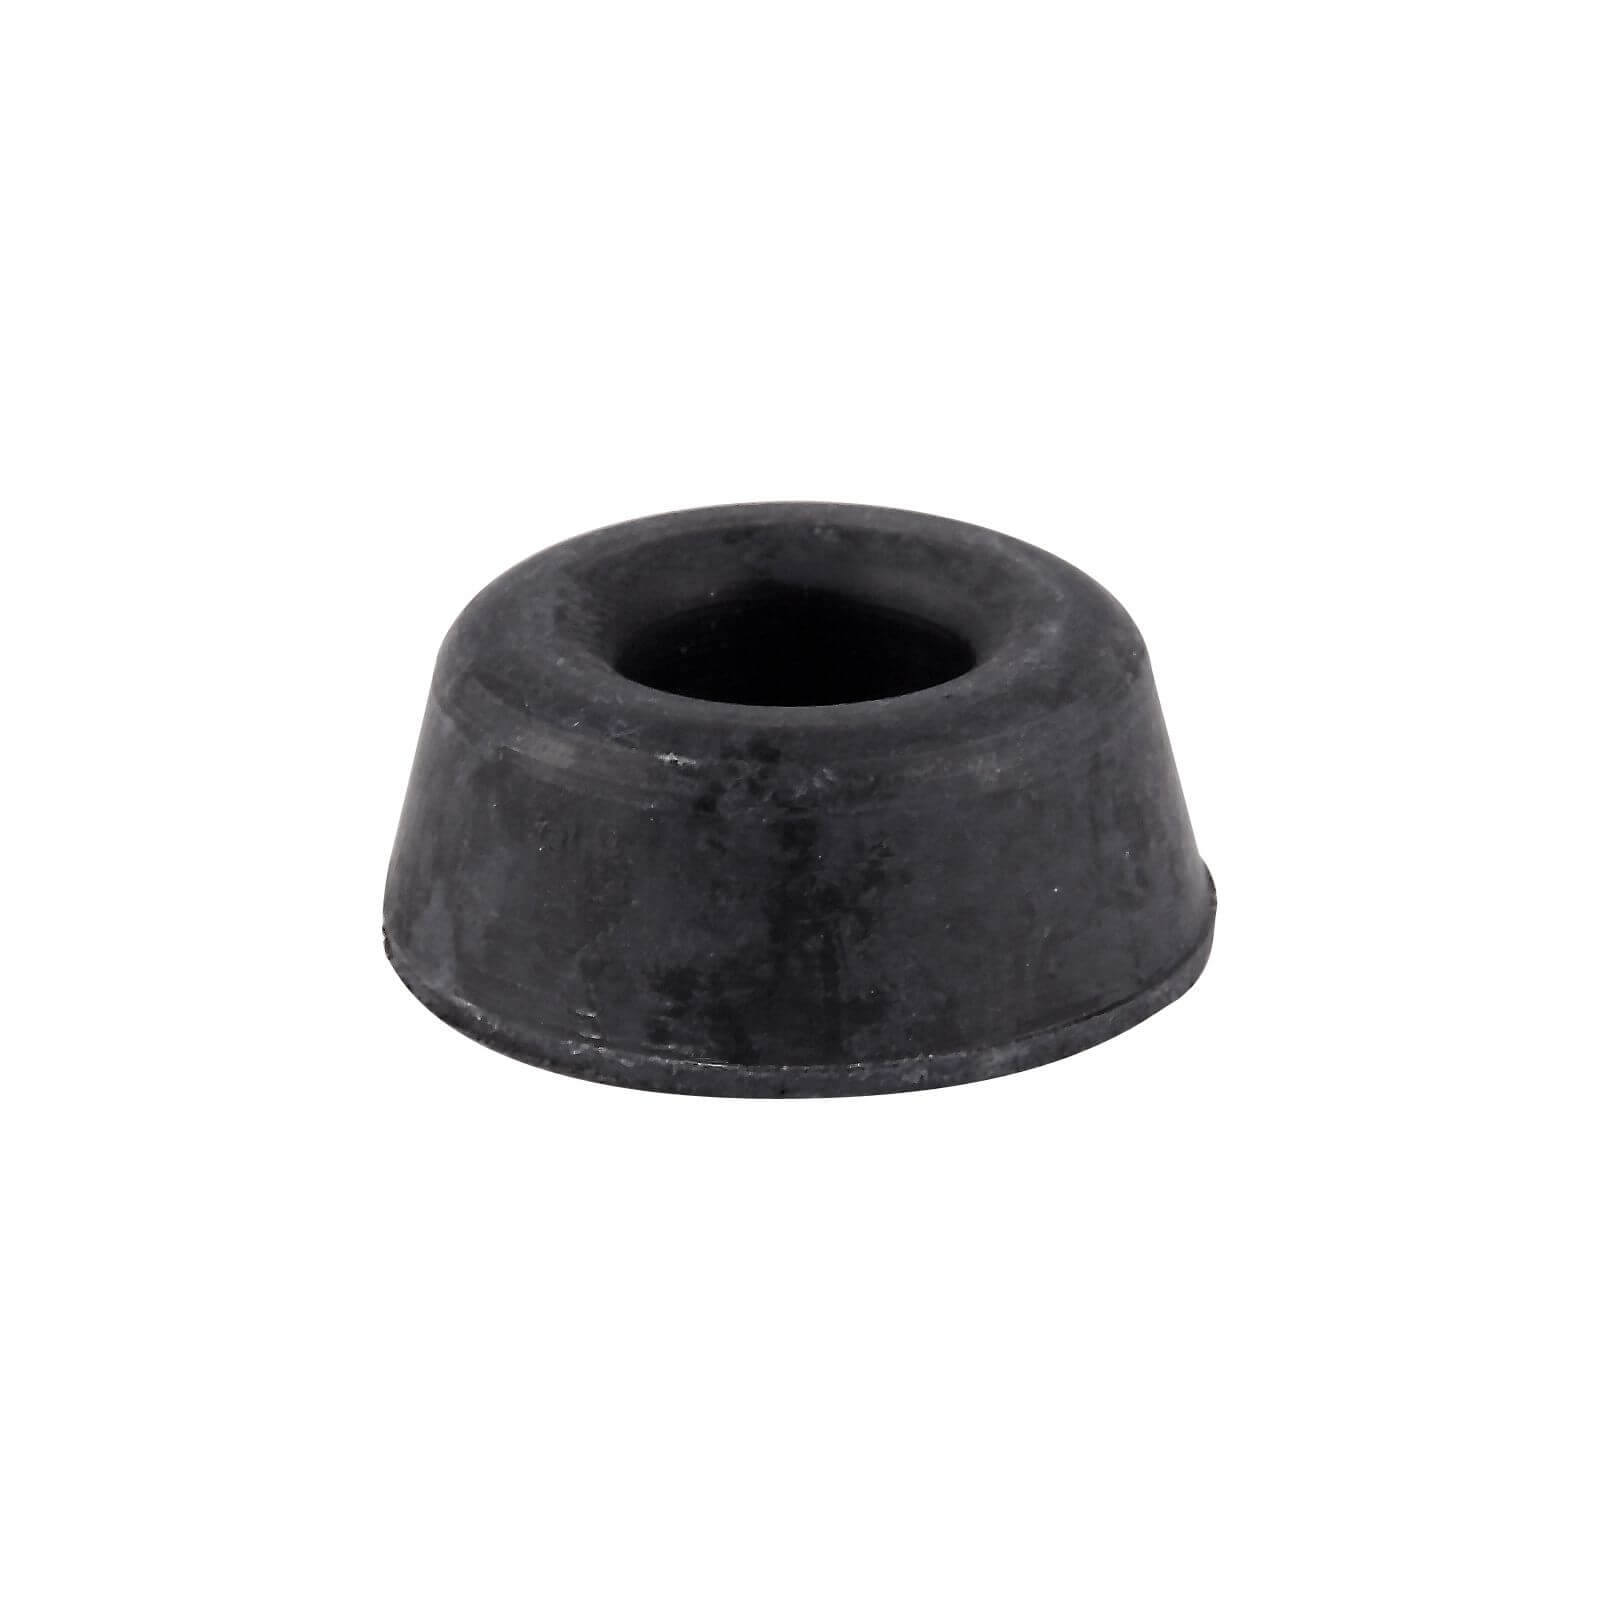 Photo of Chair Buffers - Black Rubber - 4 Pack